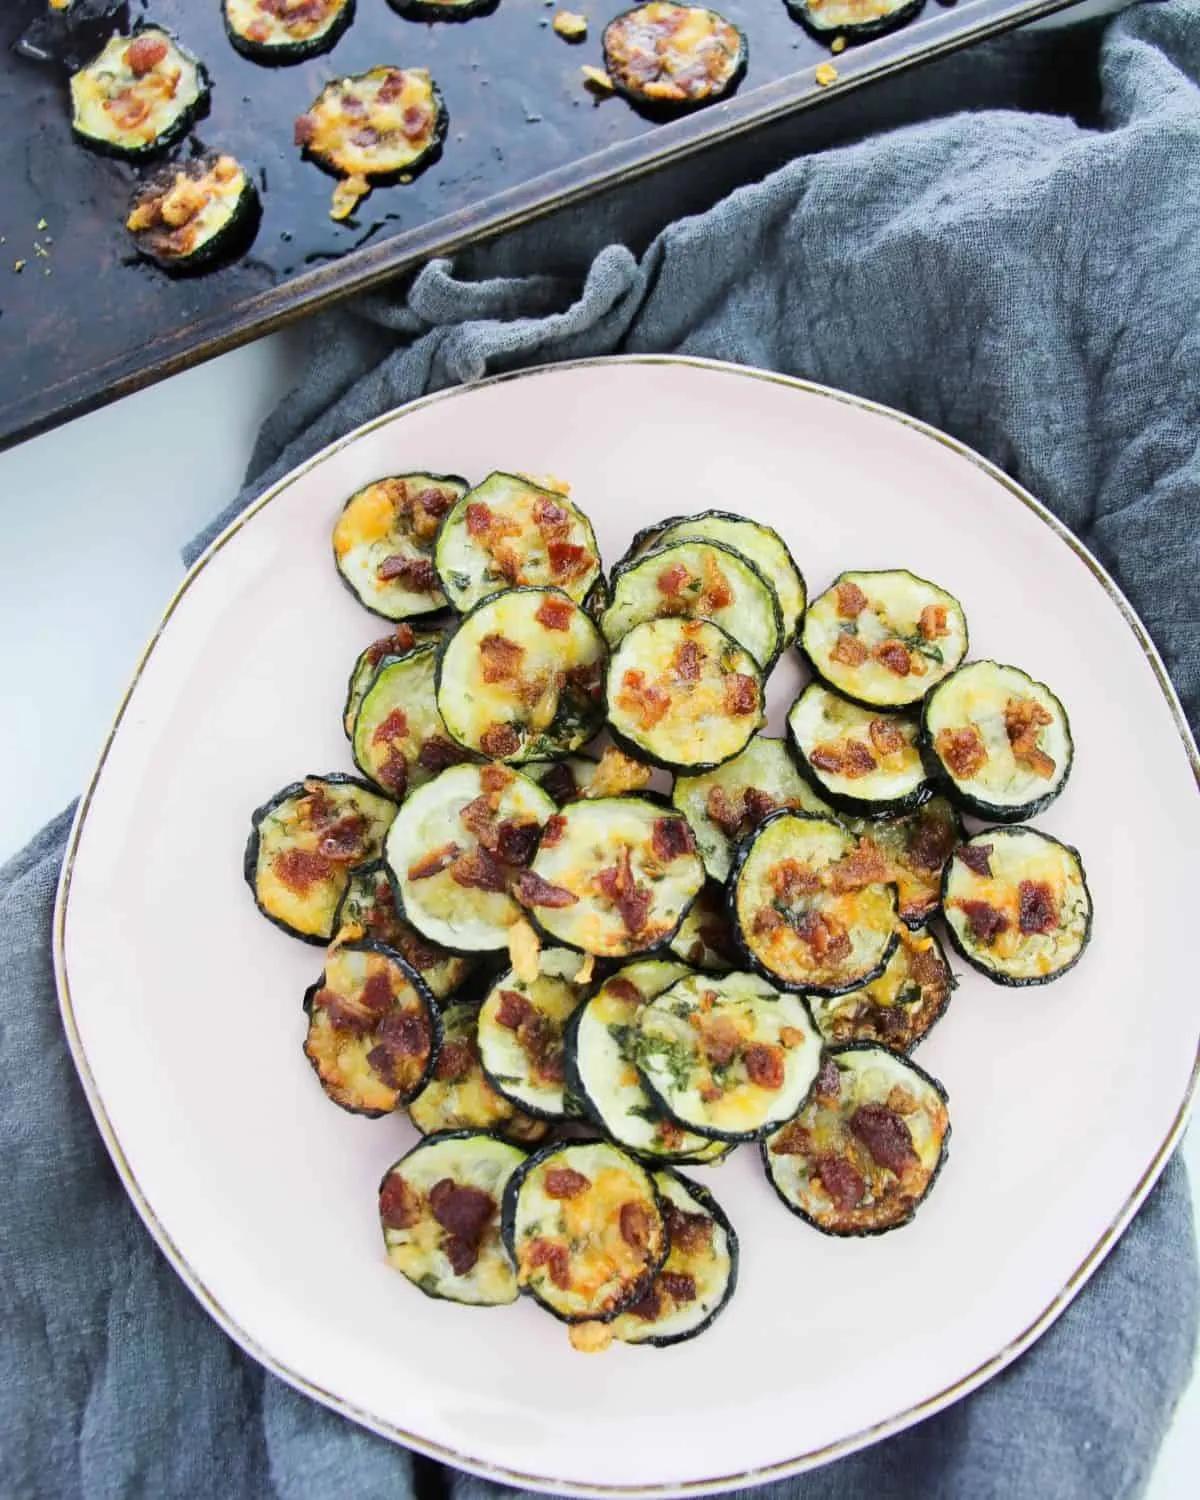 Loaded Baked Parmesan Zucchini Slices Recipe | Everyday Eileen